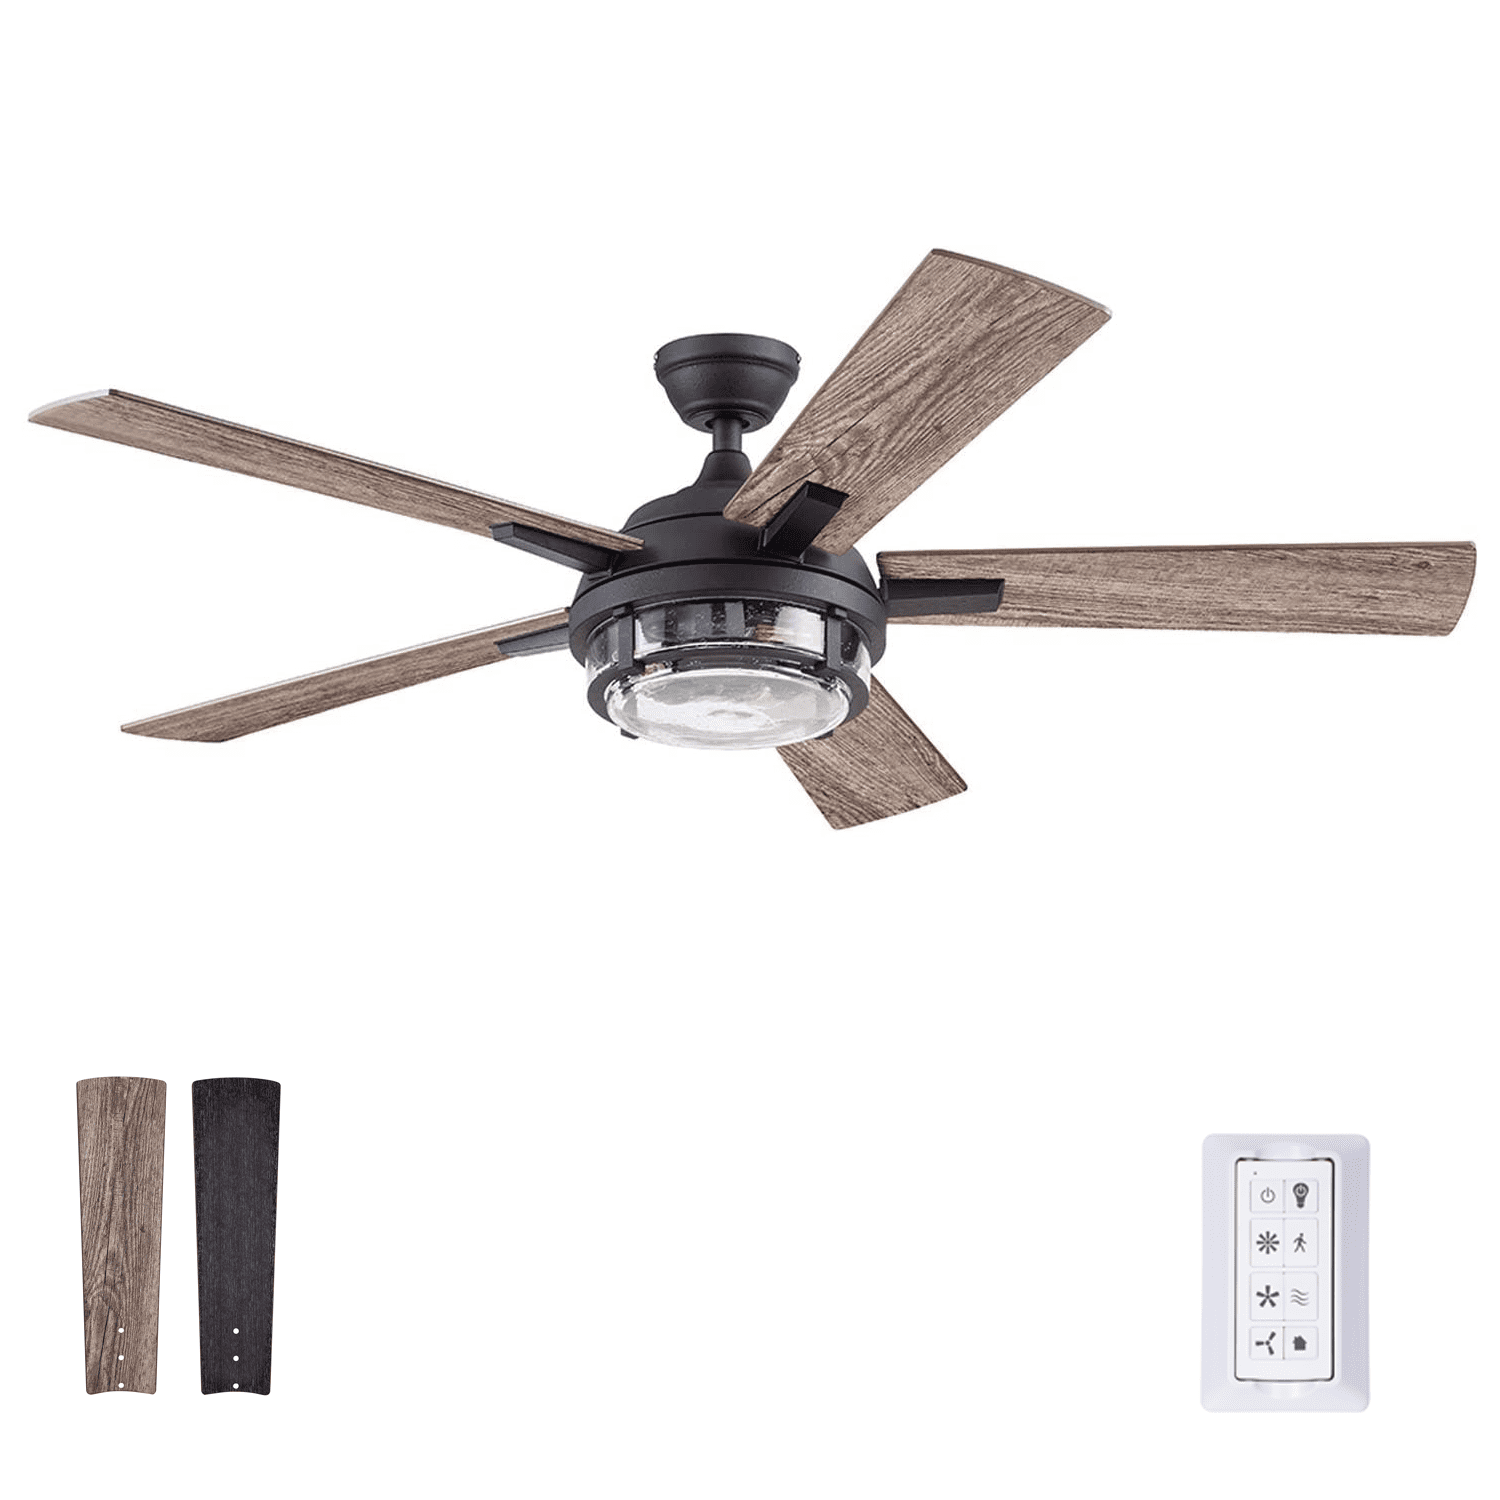 Prominence Home 52 Freyr Heavy, Hunter Ceiling Fan Replacement Blades Outdoor